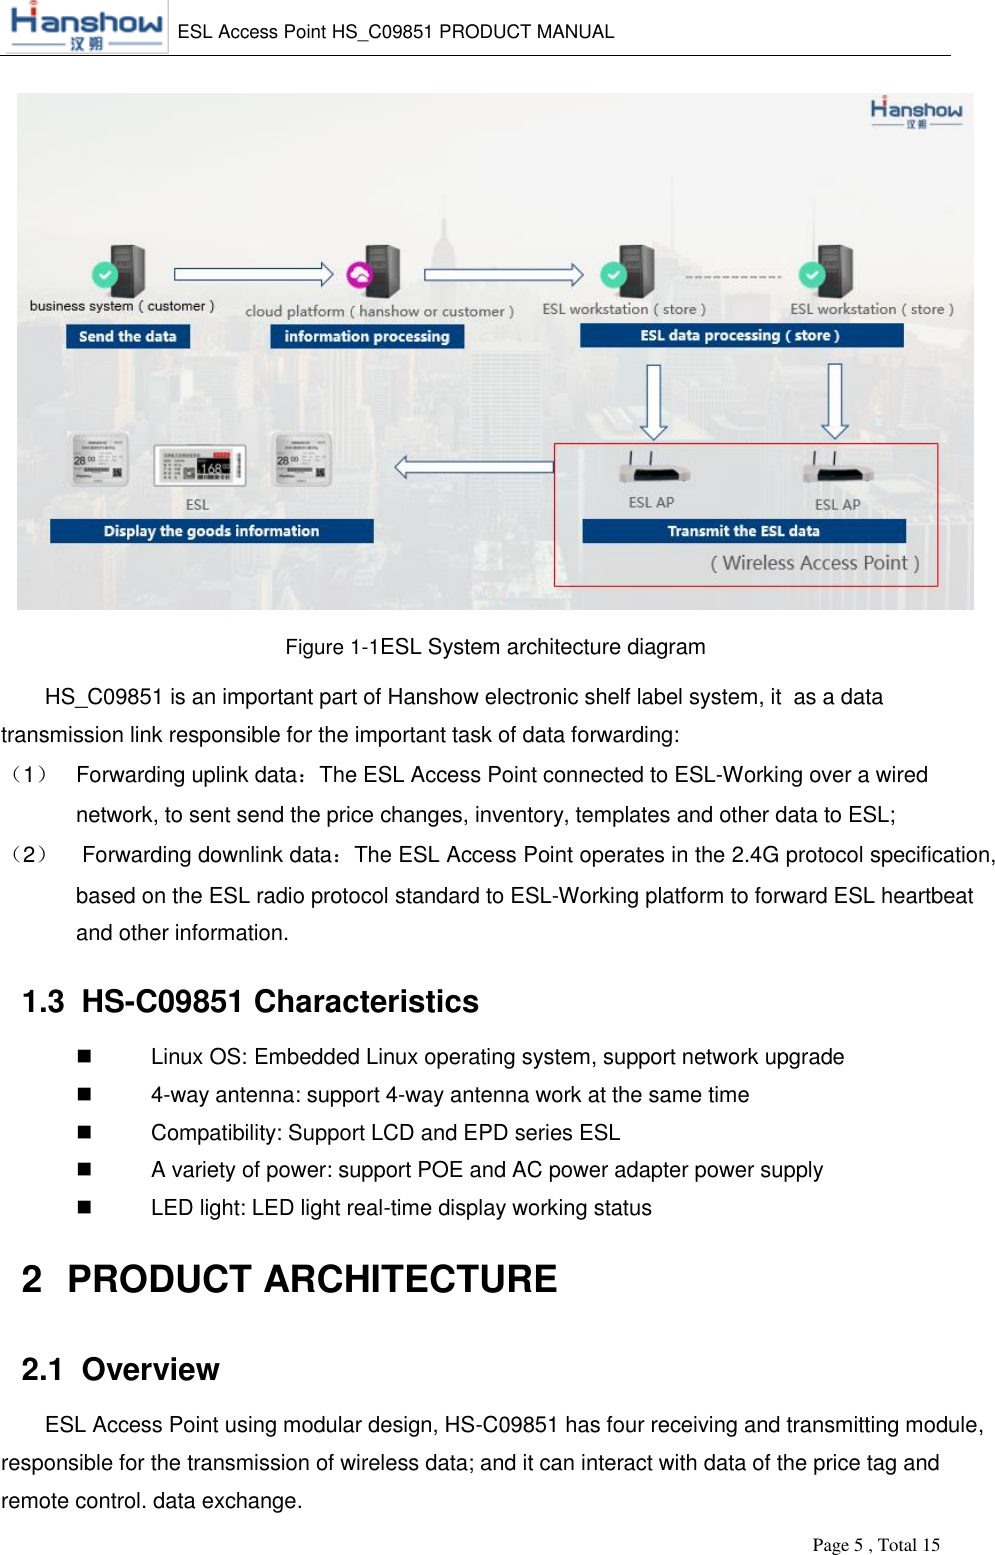    ESL Access Point HS_C09851 PRODUCT MANUAL          Page 5 , Total 15        Figure 1-1ESL System architecture diagram HS_C09851 is an important part of Hanshow electronic shelf label system, it  as a data transmission link responsible for the important task of data forwarding: （1） Forwarding uplink data：The ESL Access Point connected to ESL-Working over a wired network, to sent send the price changes, inventory, templates and other data to ESL; （2）  Forwarding downlink data：The ESL Access Point operates in the 2.4G protocol specification, based on the ESL radio protocol standard to ESL-Working platform to forward ESL heartbeat and other information. 1.3  HS-C09851 Characteristics   Linux OS: Embedded Linux operating system, support network upgrade   4-way antenna: support 4-way antenna work at the same time   Compatibility: Support LCD and EPD series ESL   A variety of power: support POE and AC power adapter power supply   LED light: LED light real-time display working status 2  PRODUCT ARCHITECTURE  2.1  Overview ESL Access Point using modular design, HS-C09851 has four receiving and transmitting module, responsible for the transmission of wireless data; and it can interact with data of the price tag and remote control. data exchange.  